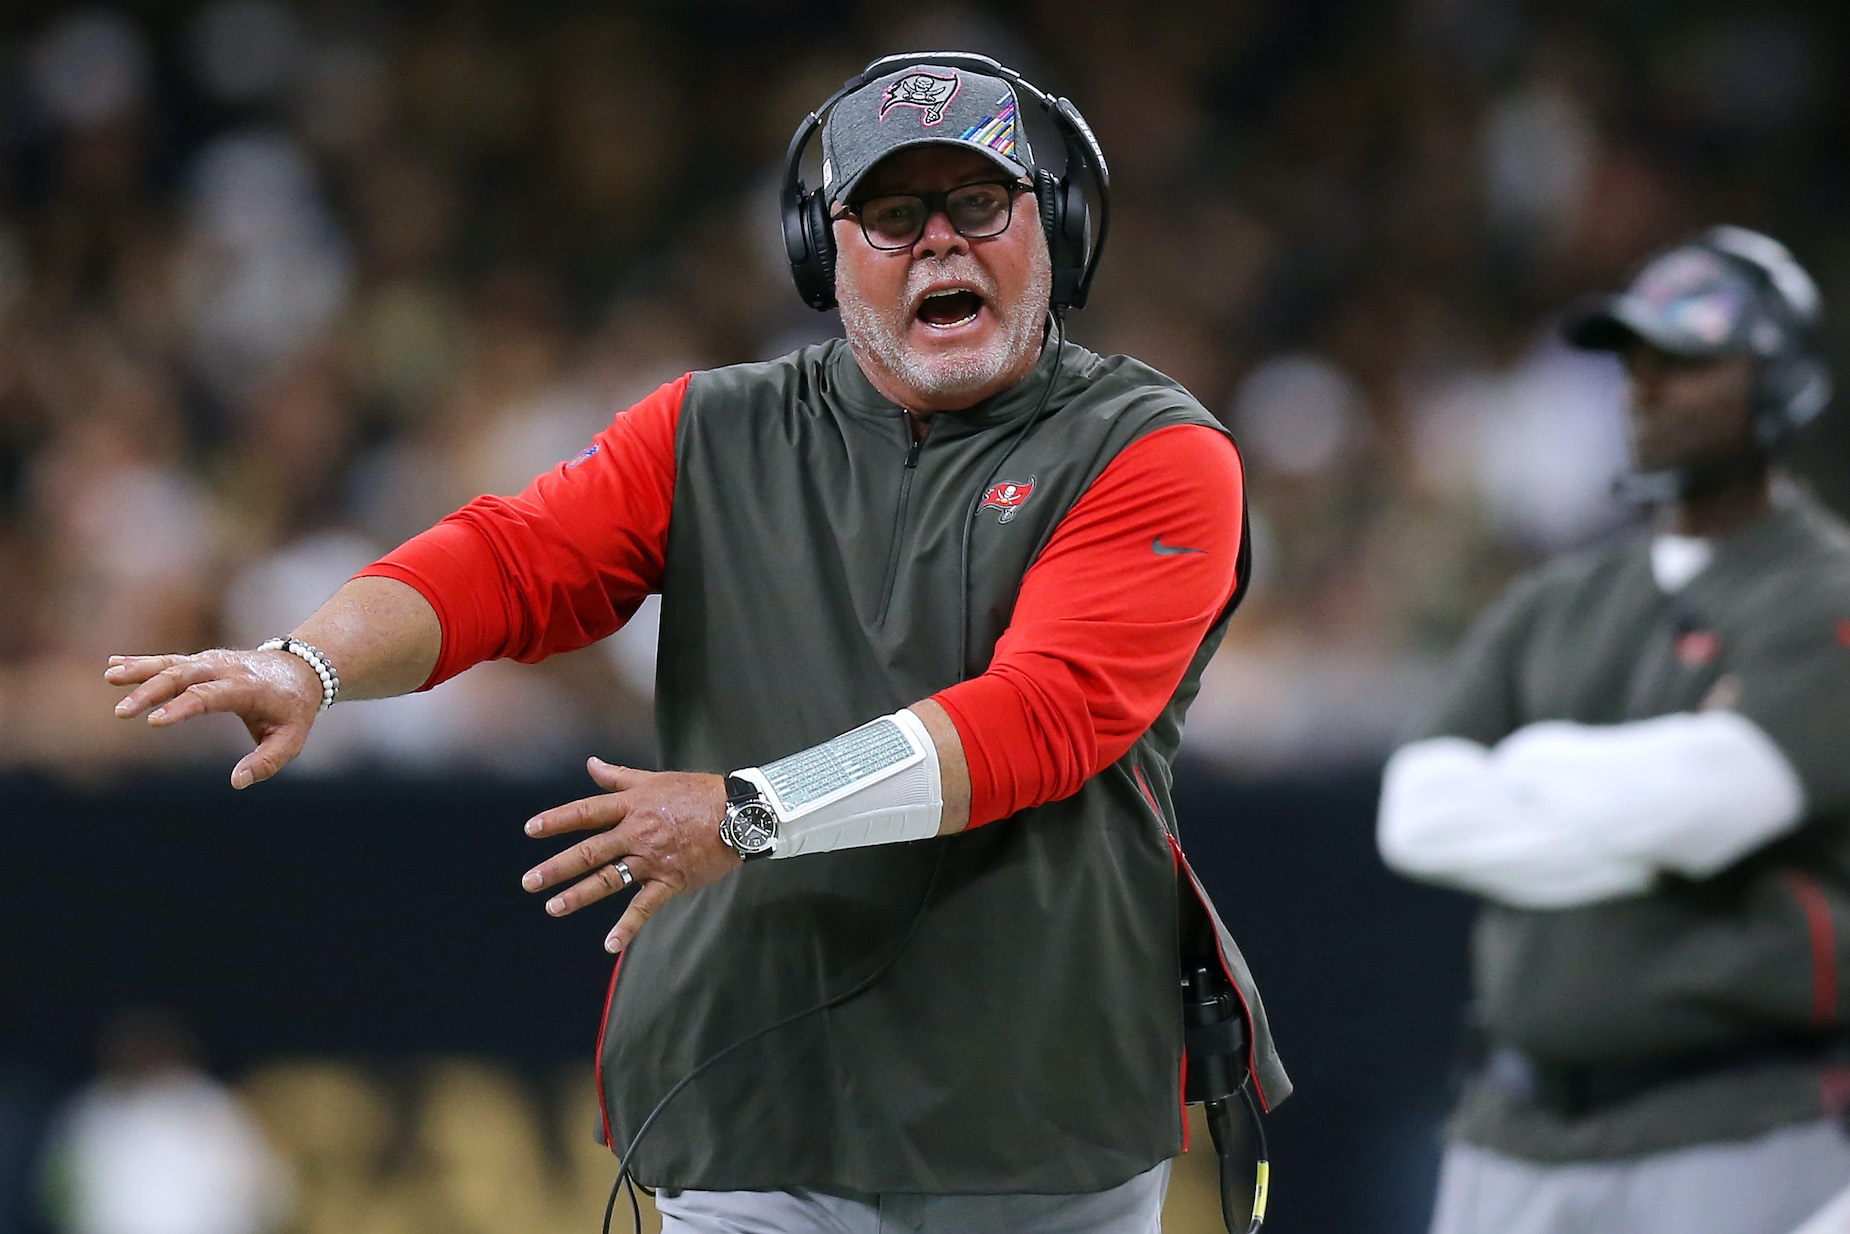 Tampa Bay Buccaneers head coach Bruce Arians on the sidelines during a 2019 NFL game.